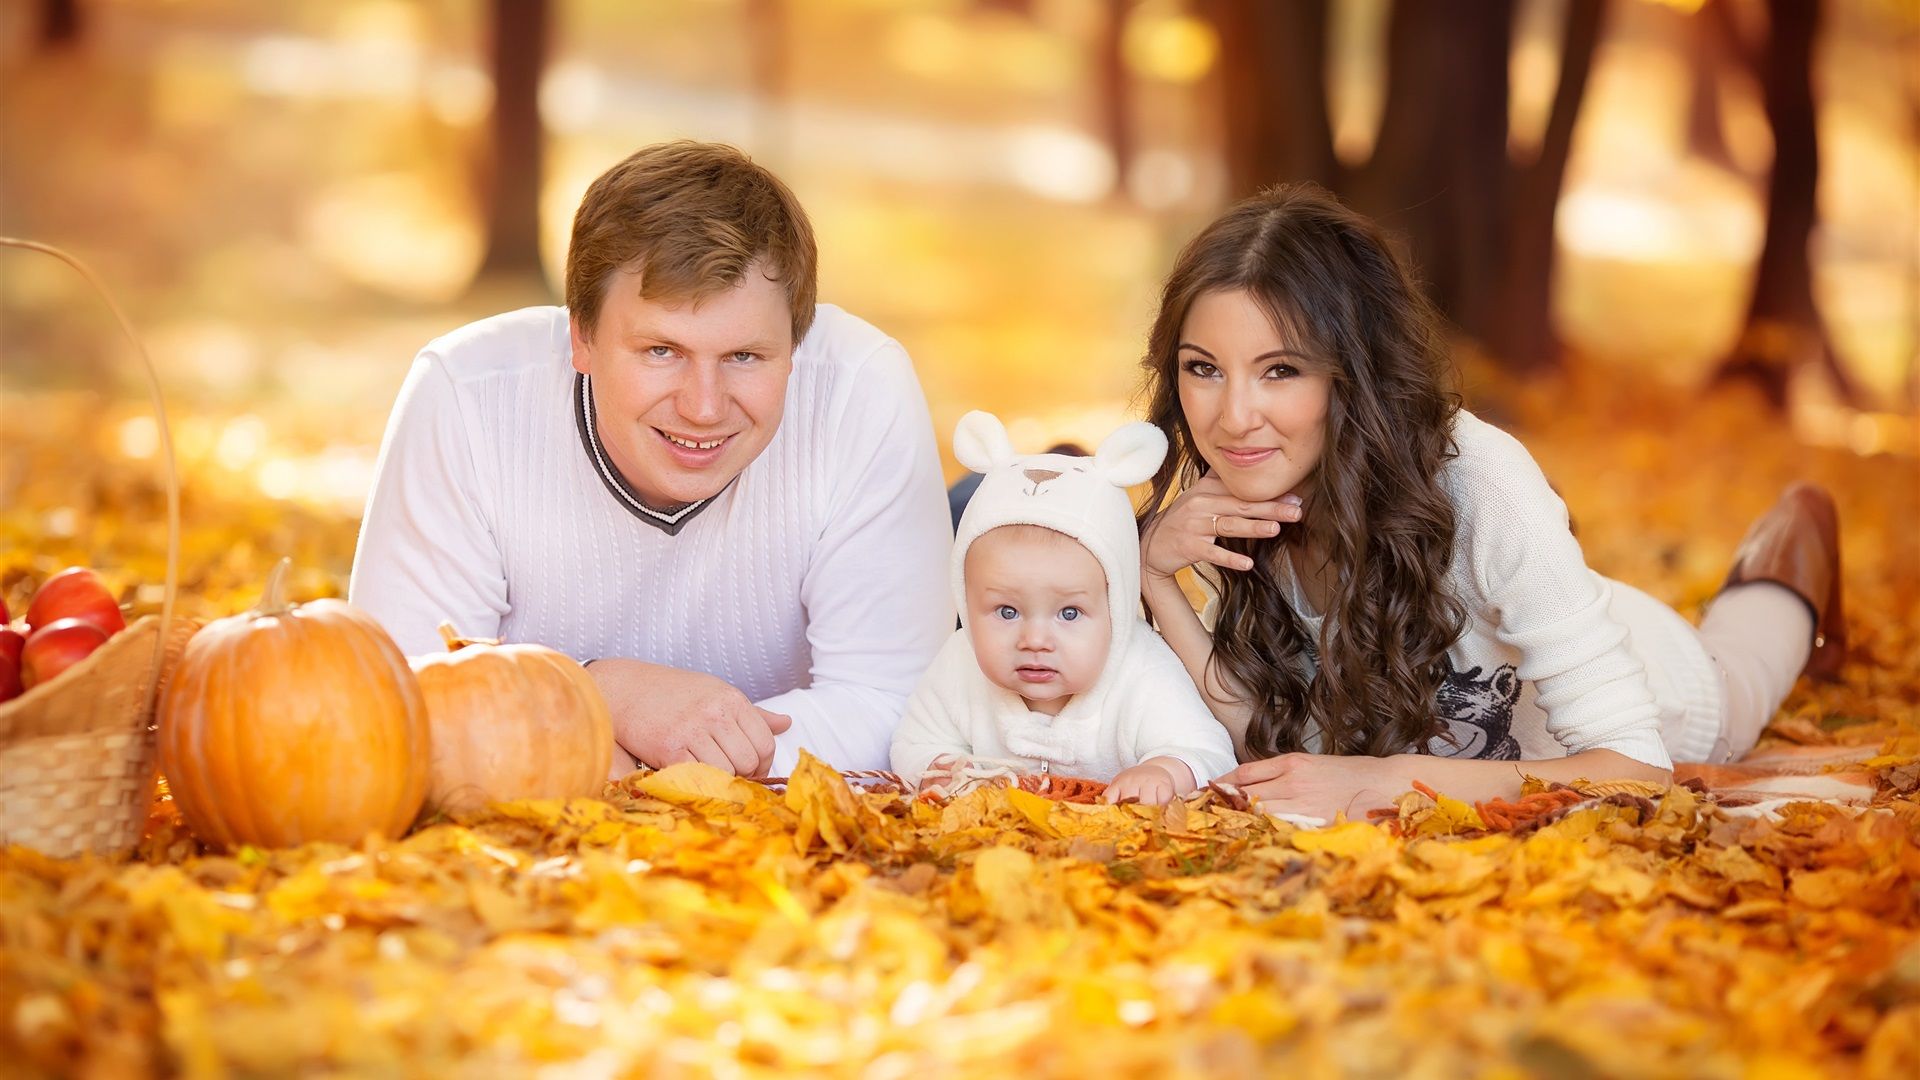 Wallpaper Family, outdoor, autumn, baby, dad, mom 2880x1800 HD